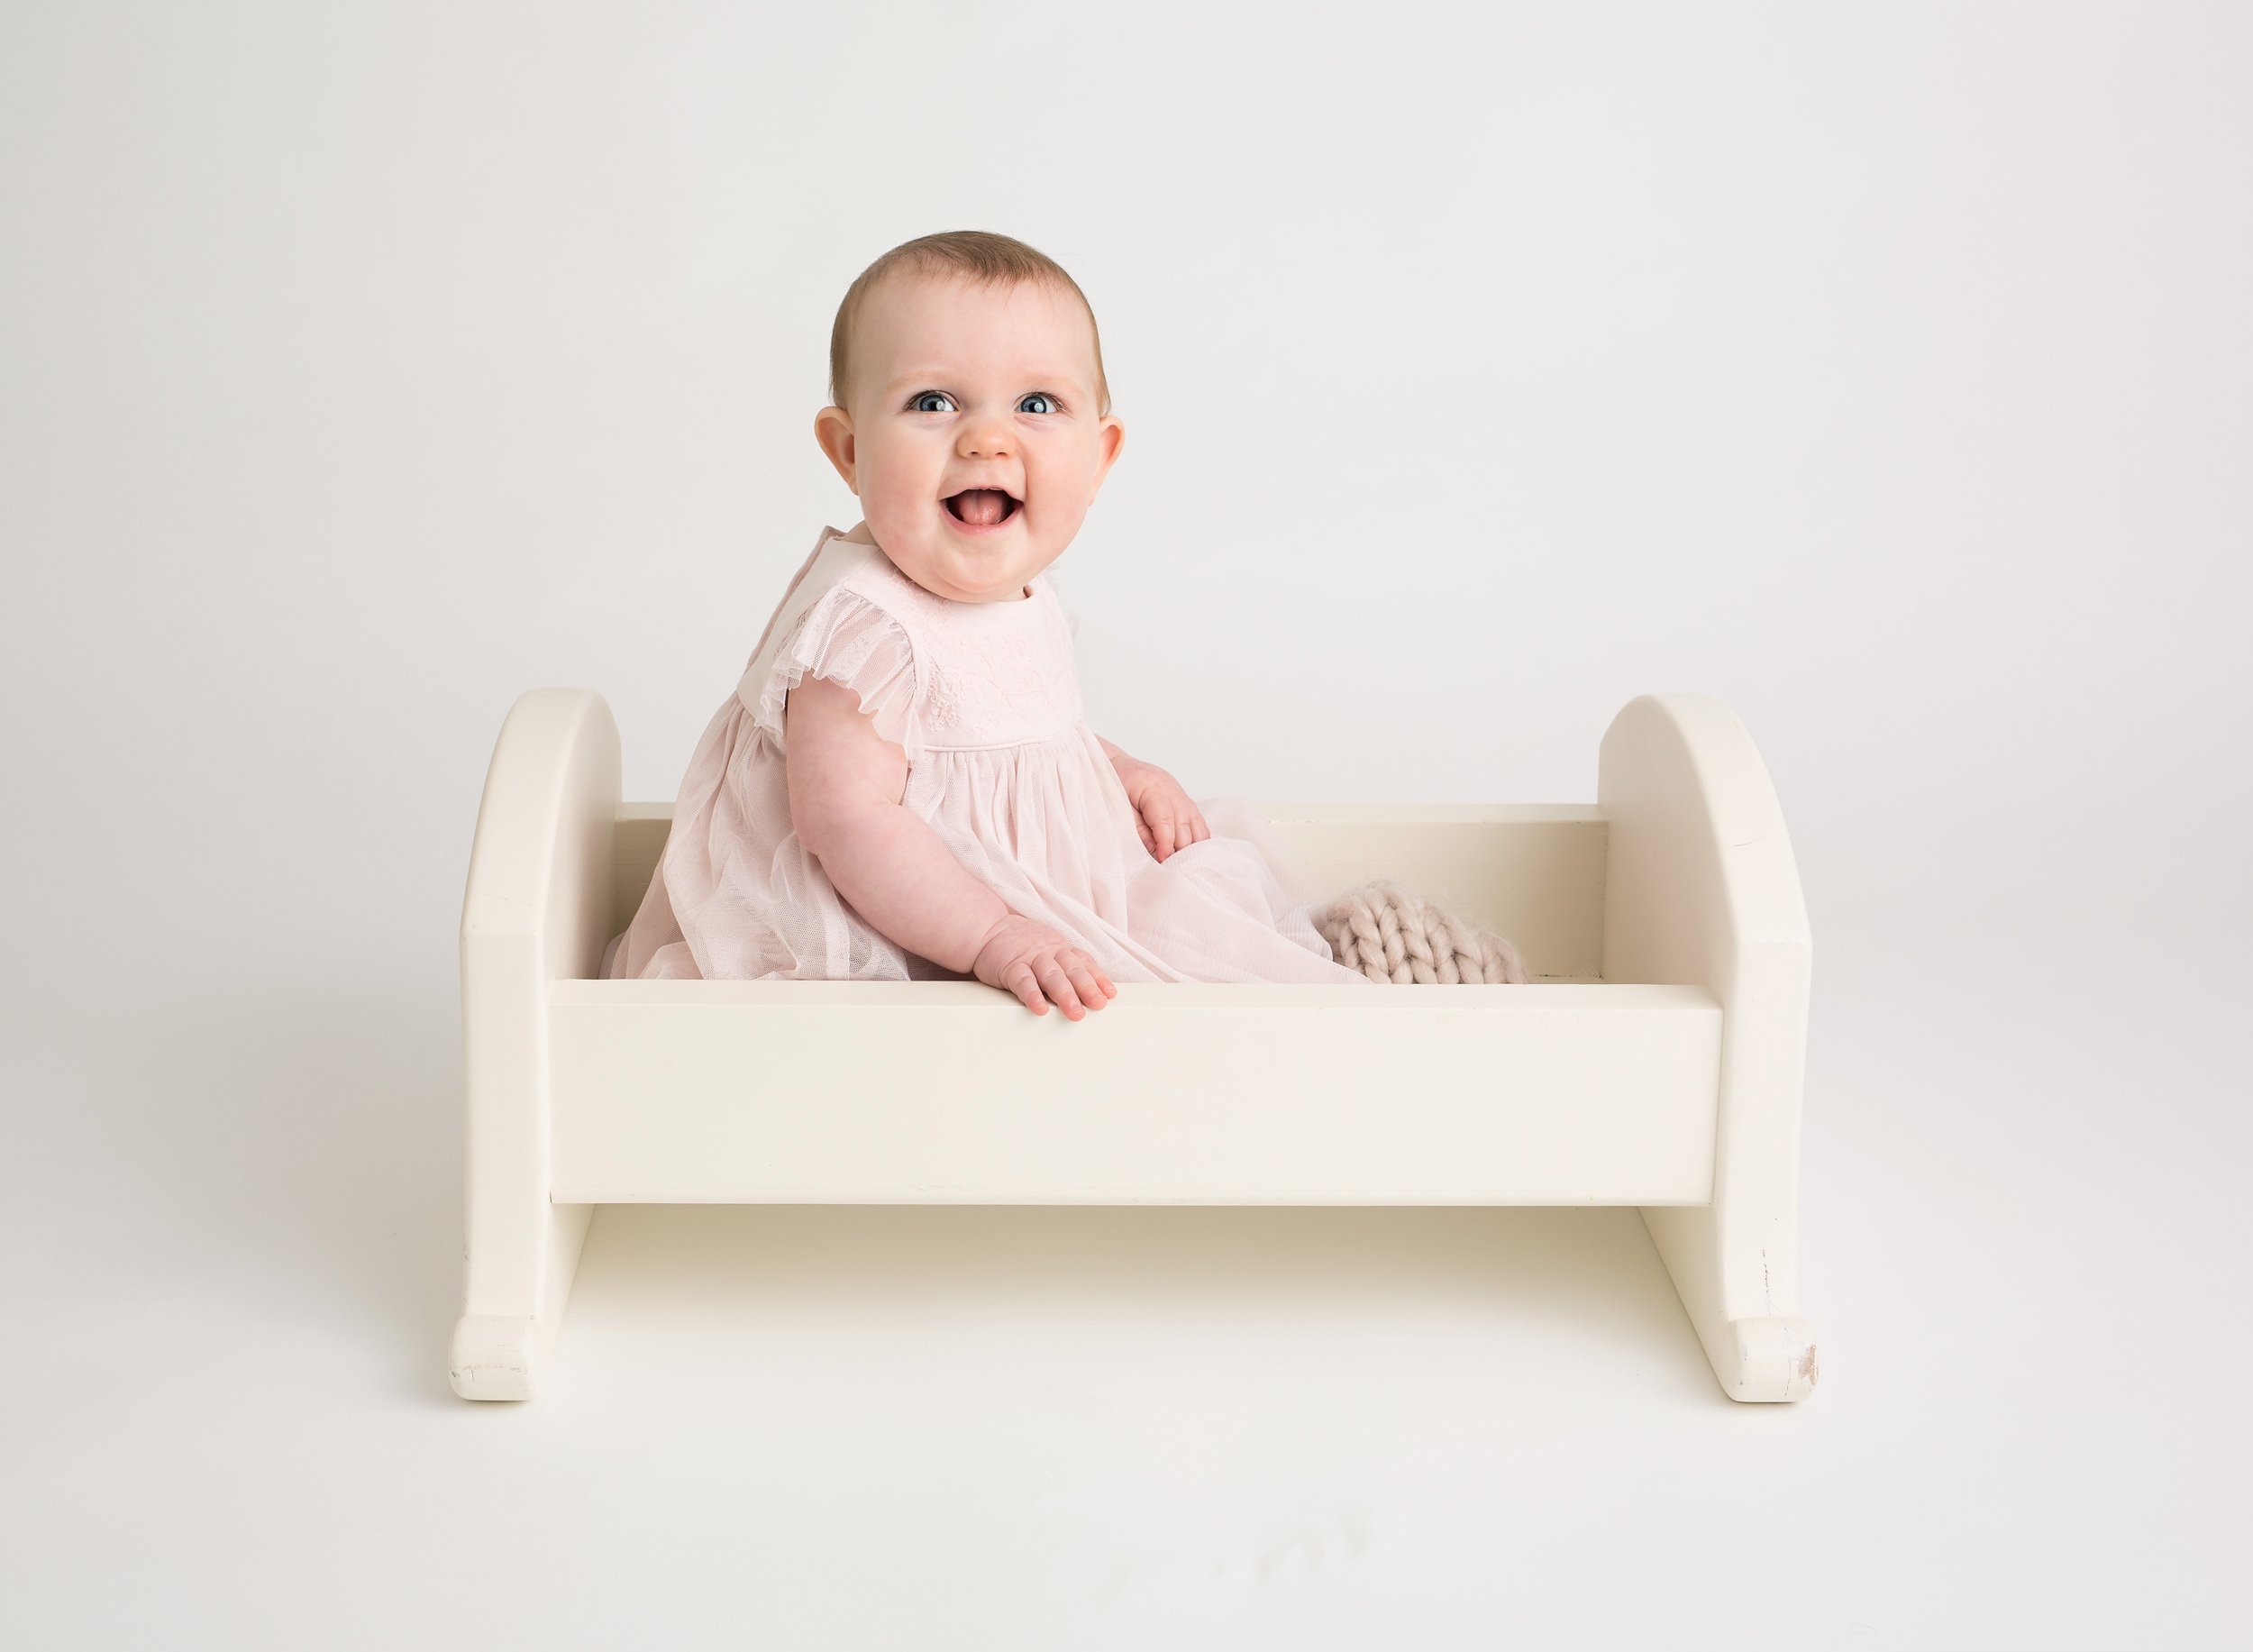 Newborn photographer in Manchester and Lancashire - baby photos, bump to baby, cake smash &amp; maternity from Rawtenstall photographer Lucie Woods Photography. Take a look at